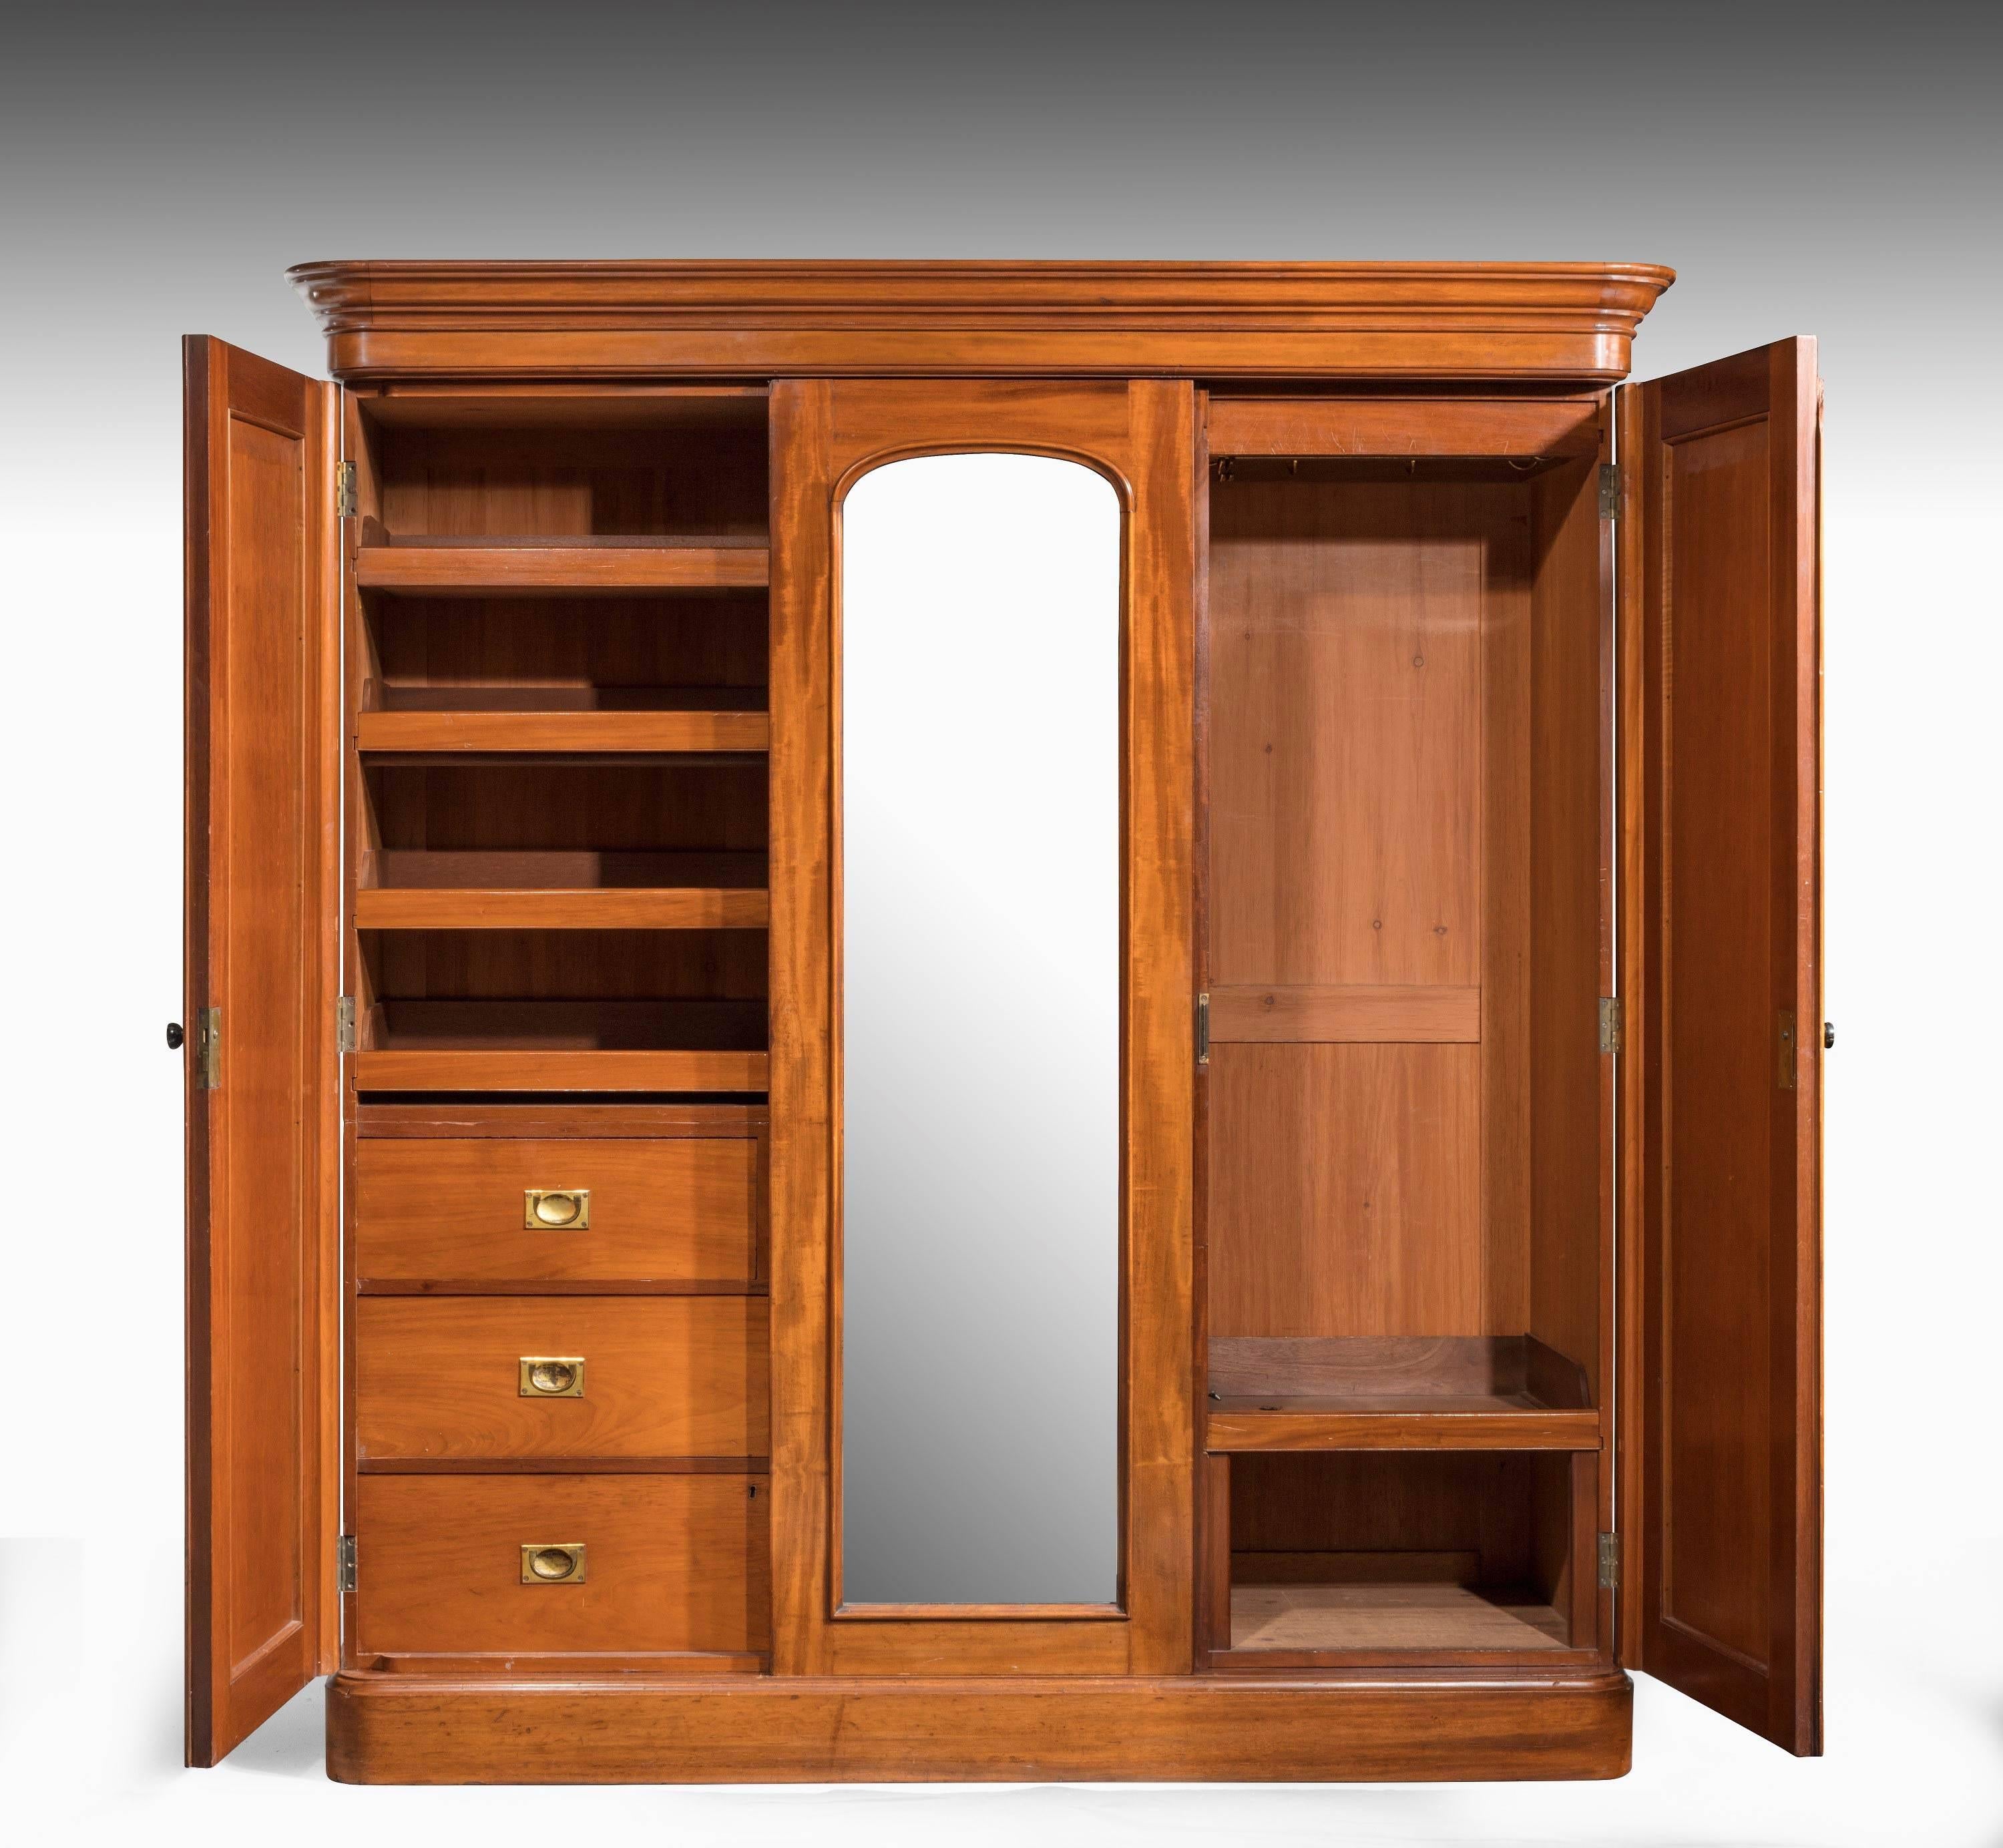 A well figured mid-19th century mahogany wardrobe. The central section with a full-length mirror. The interior very finely fitted with drawers and linen trays.